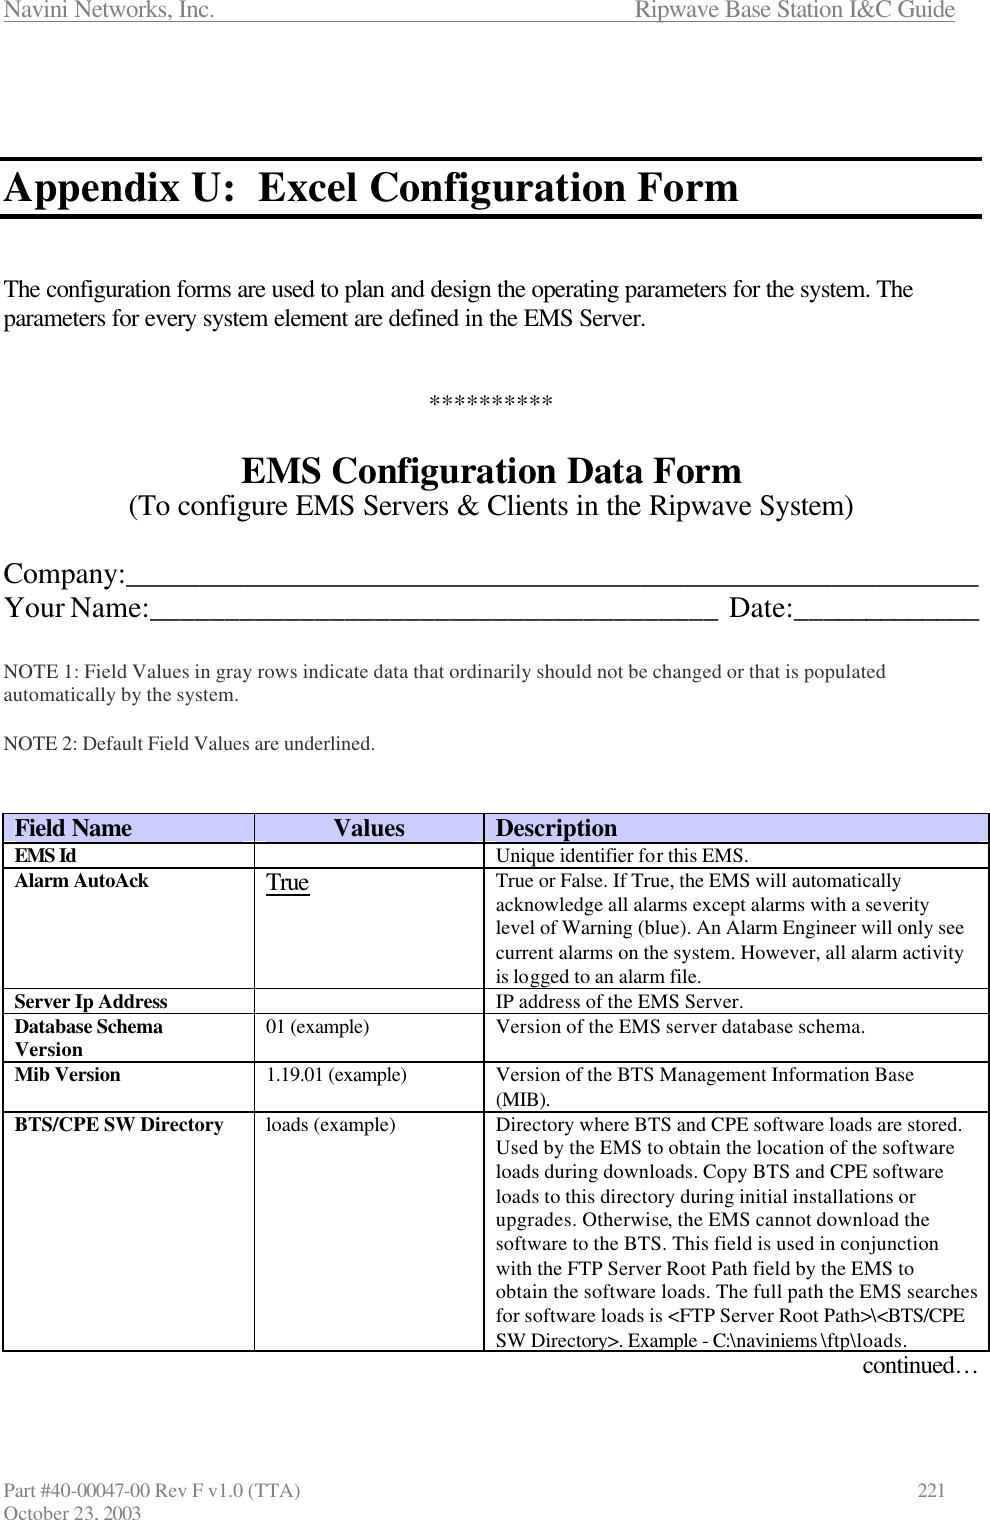 Navini Networks, Inc.                      Ripwave Base Station I&amp;C Guide Part #40-00047-00 Rev F v1.0 (TTA)            221 October 23, 2003    Appendix U:  Excel Configuration Form   The configuration forms are used to plan and design the operating parameters for the system. The parameters for every system element are defined in the EMS Server.   **********  EMS Configuration Data Form (To configure EMS Servers &amp; Clients in the Ripwave System)  Company:__________________________________________________________ Your Name:______________________________________  Date:_____________  NOTE 1: Field Values in gray rows indicate data that ordinarily should not be changed or that is populated automatically by the system.  NOTE 2: Default Field Values are underlined.   Field Name Values Description EMS Id  Unique identifier for this EMS. Alarm AutoAck True True or False. If True, the EMS will automatically acknowledge all alarms except alarms with a severity level of Warning (blue). An Alarm Engineer will only see current alarms on the system. However, all alarm activity is logged to an alarm file. Server Ip Address  IP address of the EMS Server. Database Schema Version 01 (example) Version of the EMS server database schema. Mib Version 1.19.01 (example) Version of the BTS Management Information Base (MIB). BTS/CPE SW Directory loads (example) Directory where BTS and CPE software loads are stored. Used by the EMS to obtain the location of the software loads during downloads. Copy BTS and CPE software loads to this directory during initial installations or upgrades. Otherwise, the EMS cannot download the software to the BTS. This field is used in conjunction with the FTP Server Root Path field by the EMS to obtain the software loads. The full path the EMS searches for software loads is &lt;FTP Server Root Path&gt;\&lt;BTS/CPE SW Directory&gt;. Example - C:\naviniems \ftp\loads. continued… 